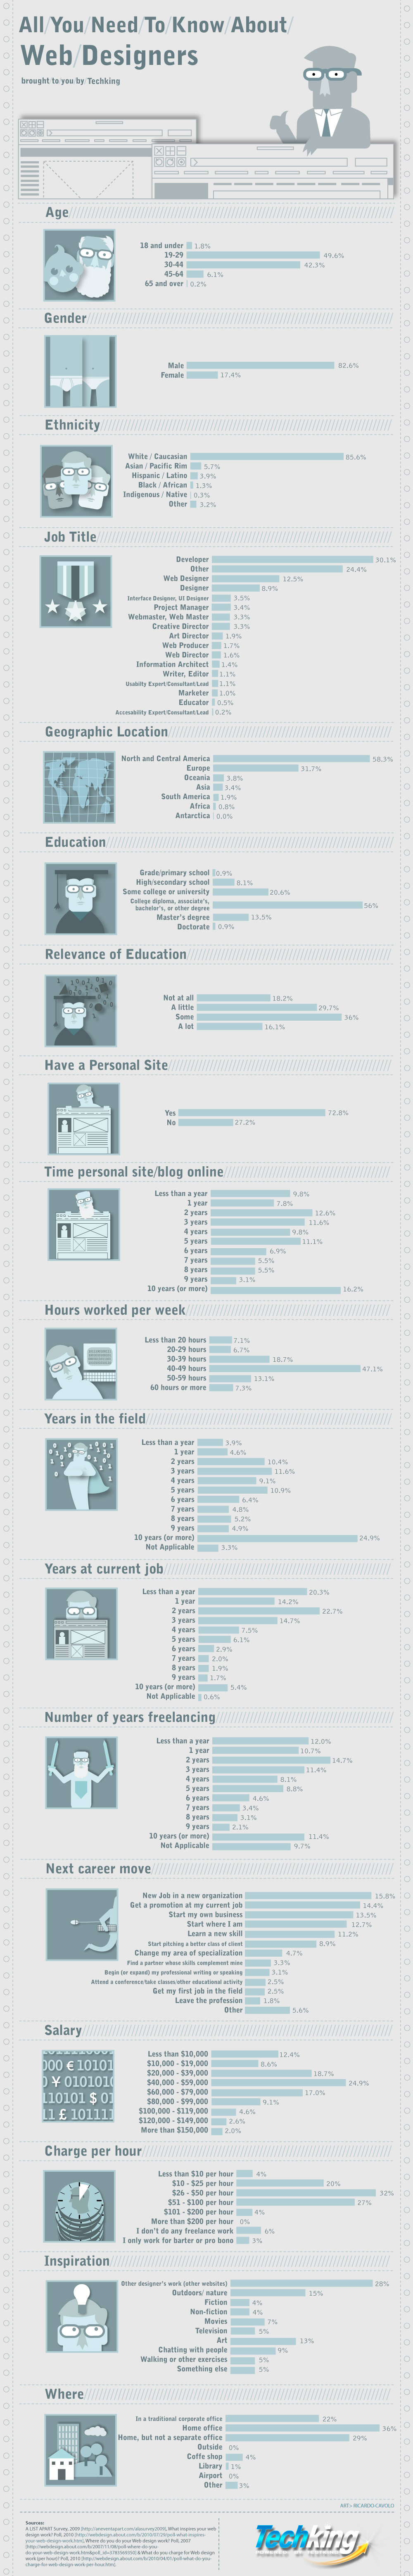 All You Need To Know About Web Designers [Infographic] 